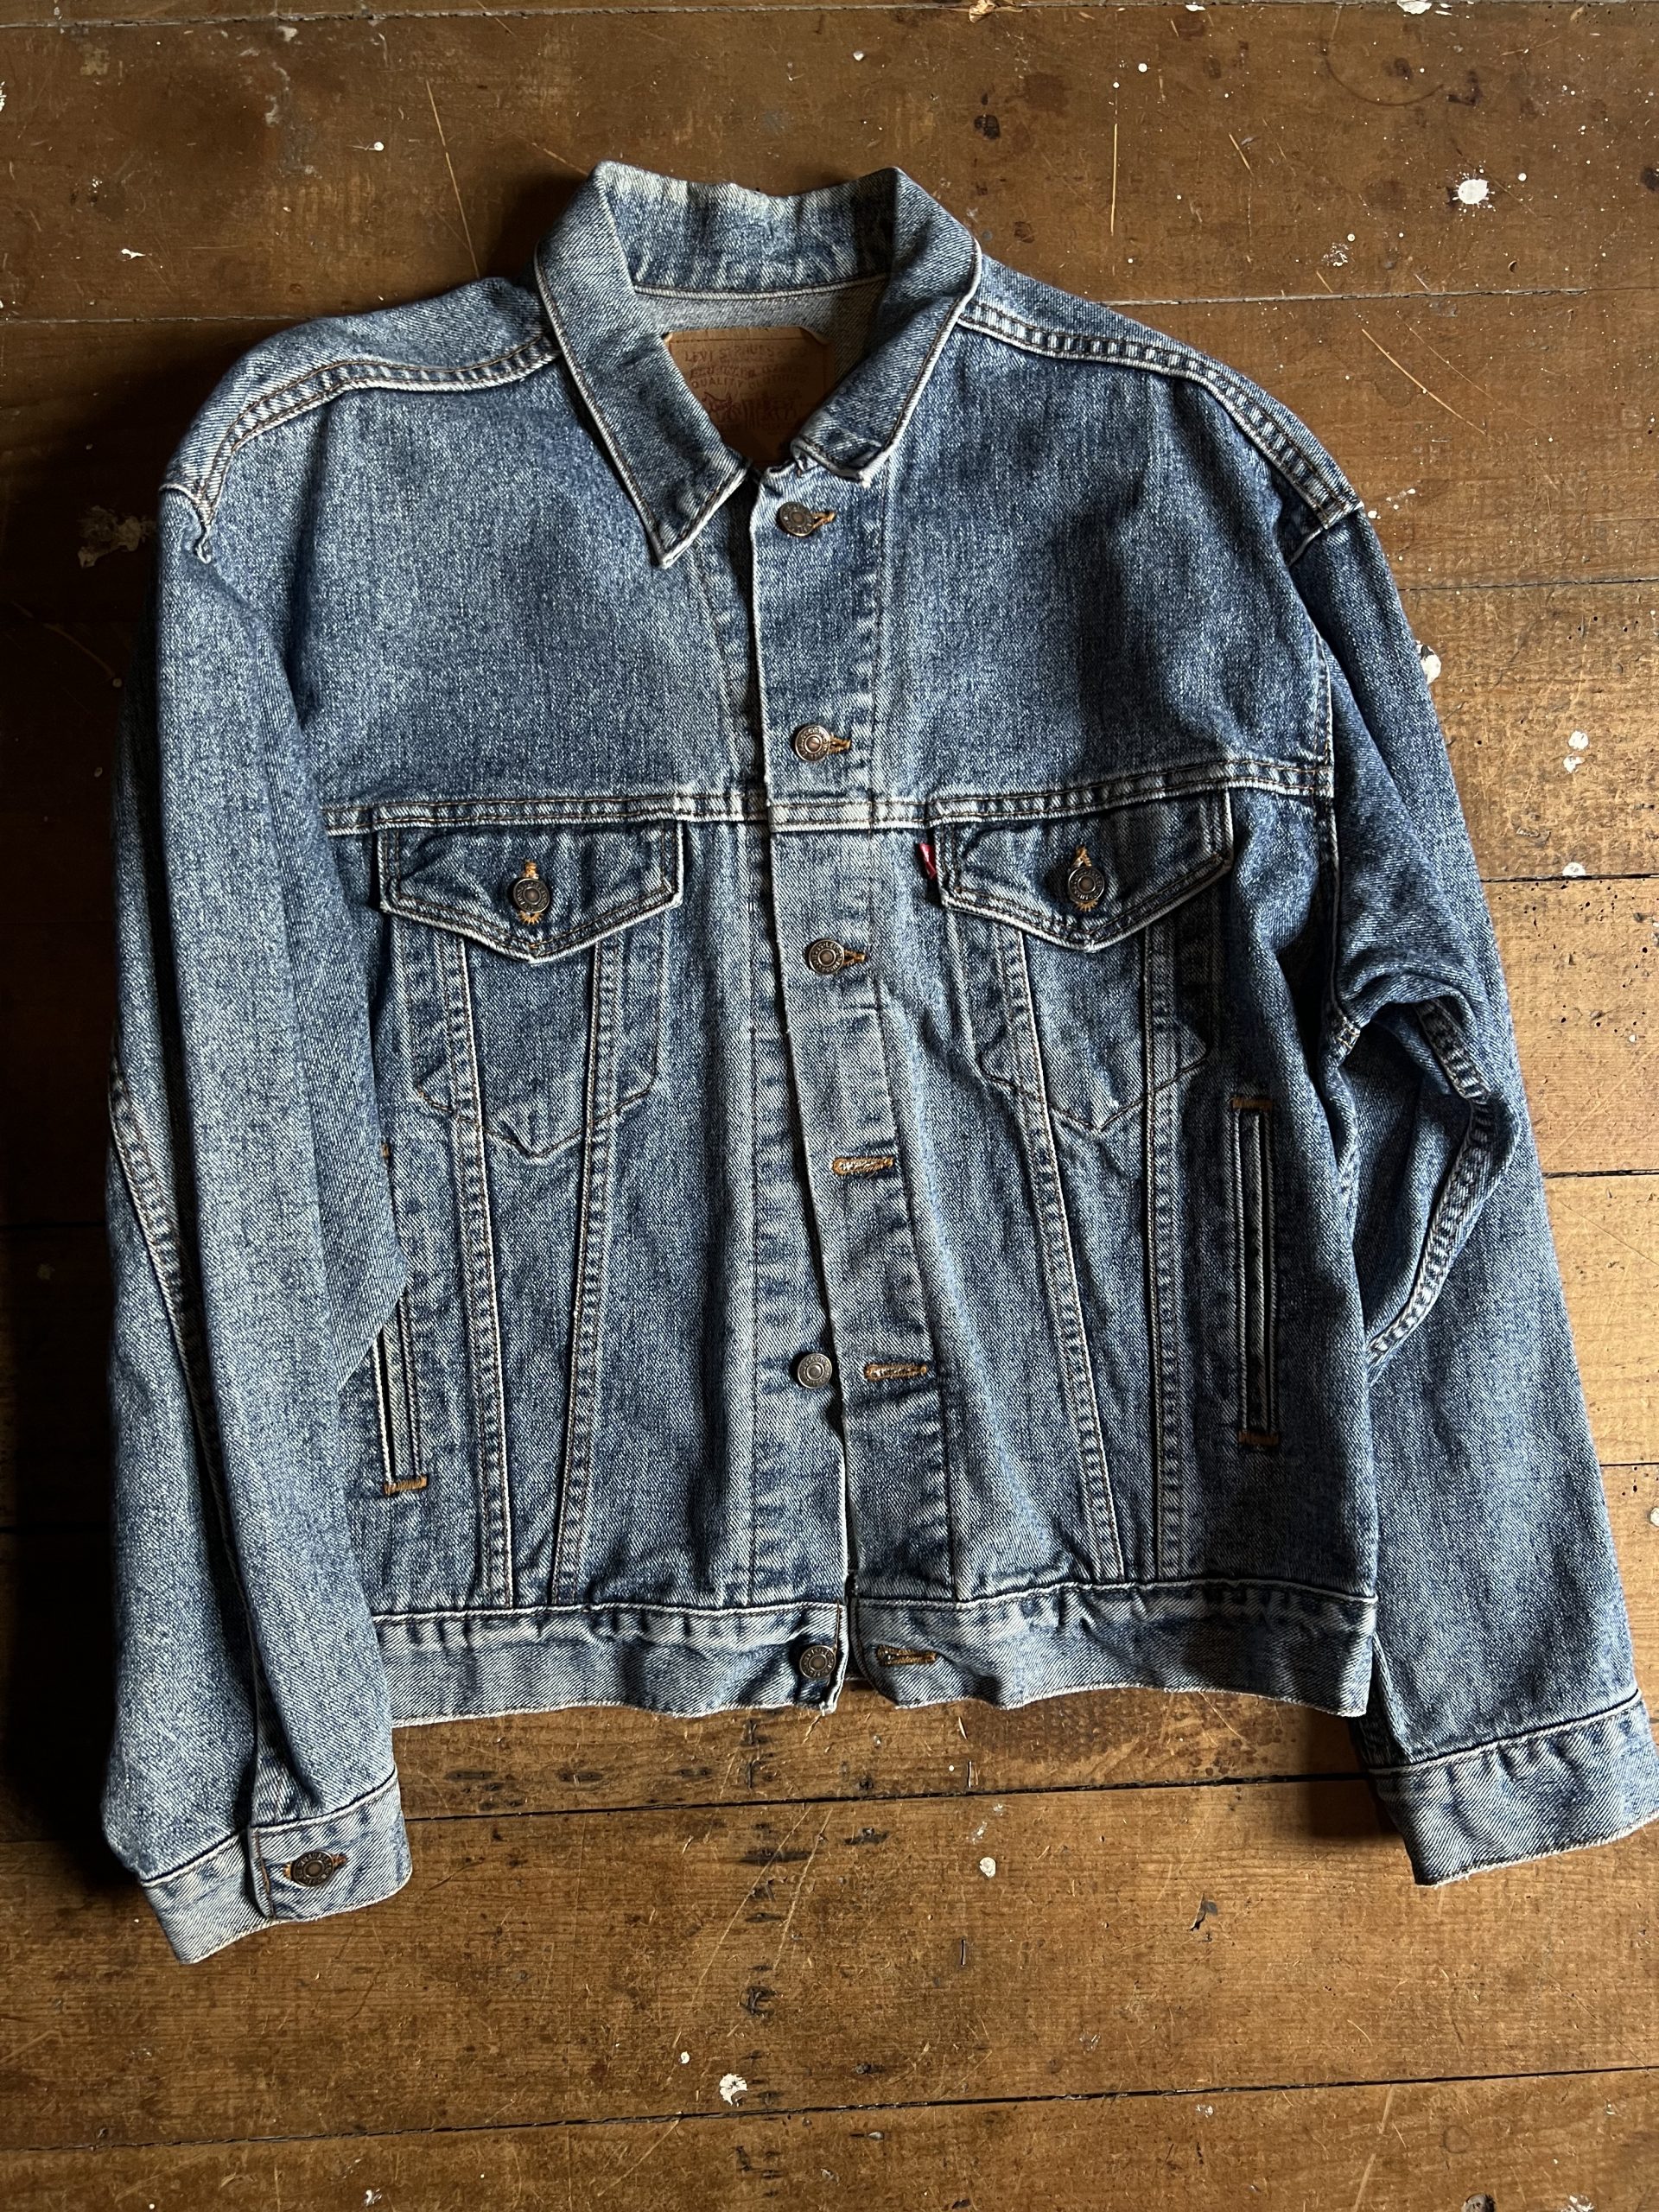 Levi’s Trucker Jacket - Red Tab - Search and Destroy